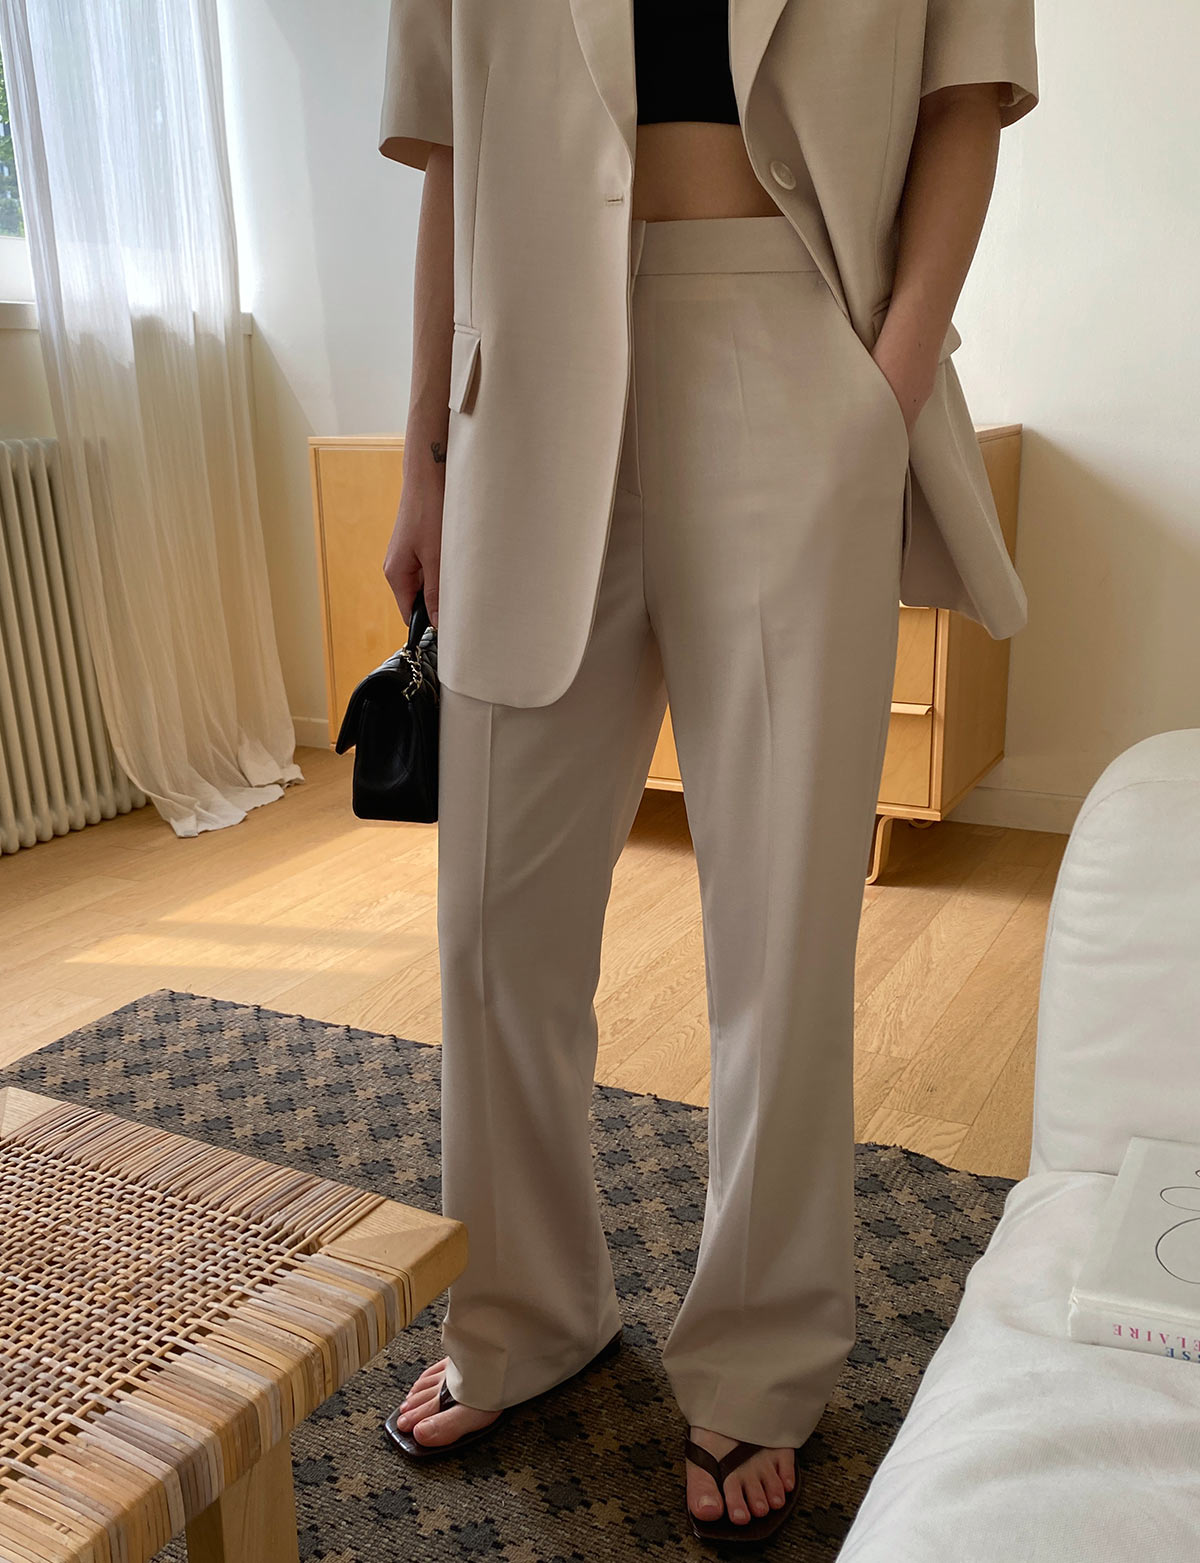 Tan Straight Suit Trousers